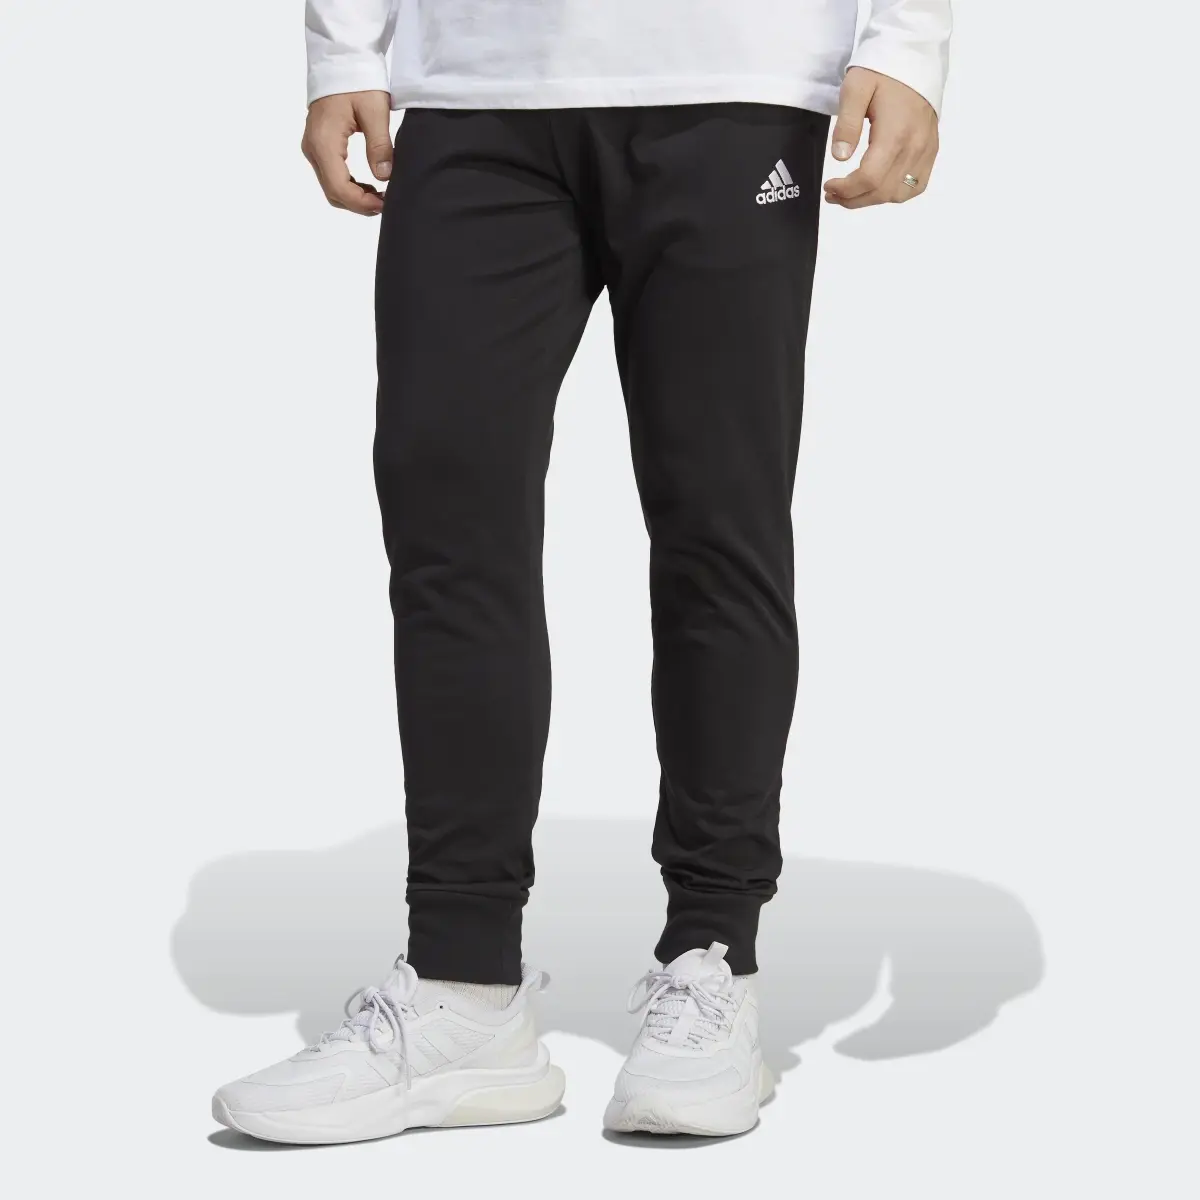 Adidas Essentials Single Jersey Tapered Cuff Pants. 1